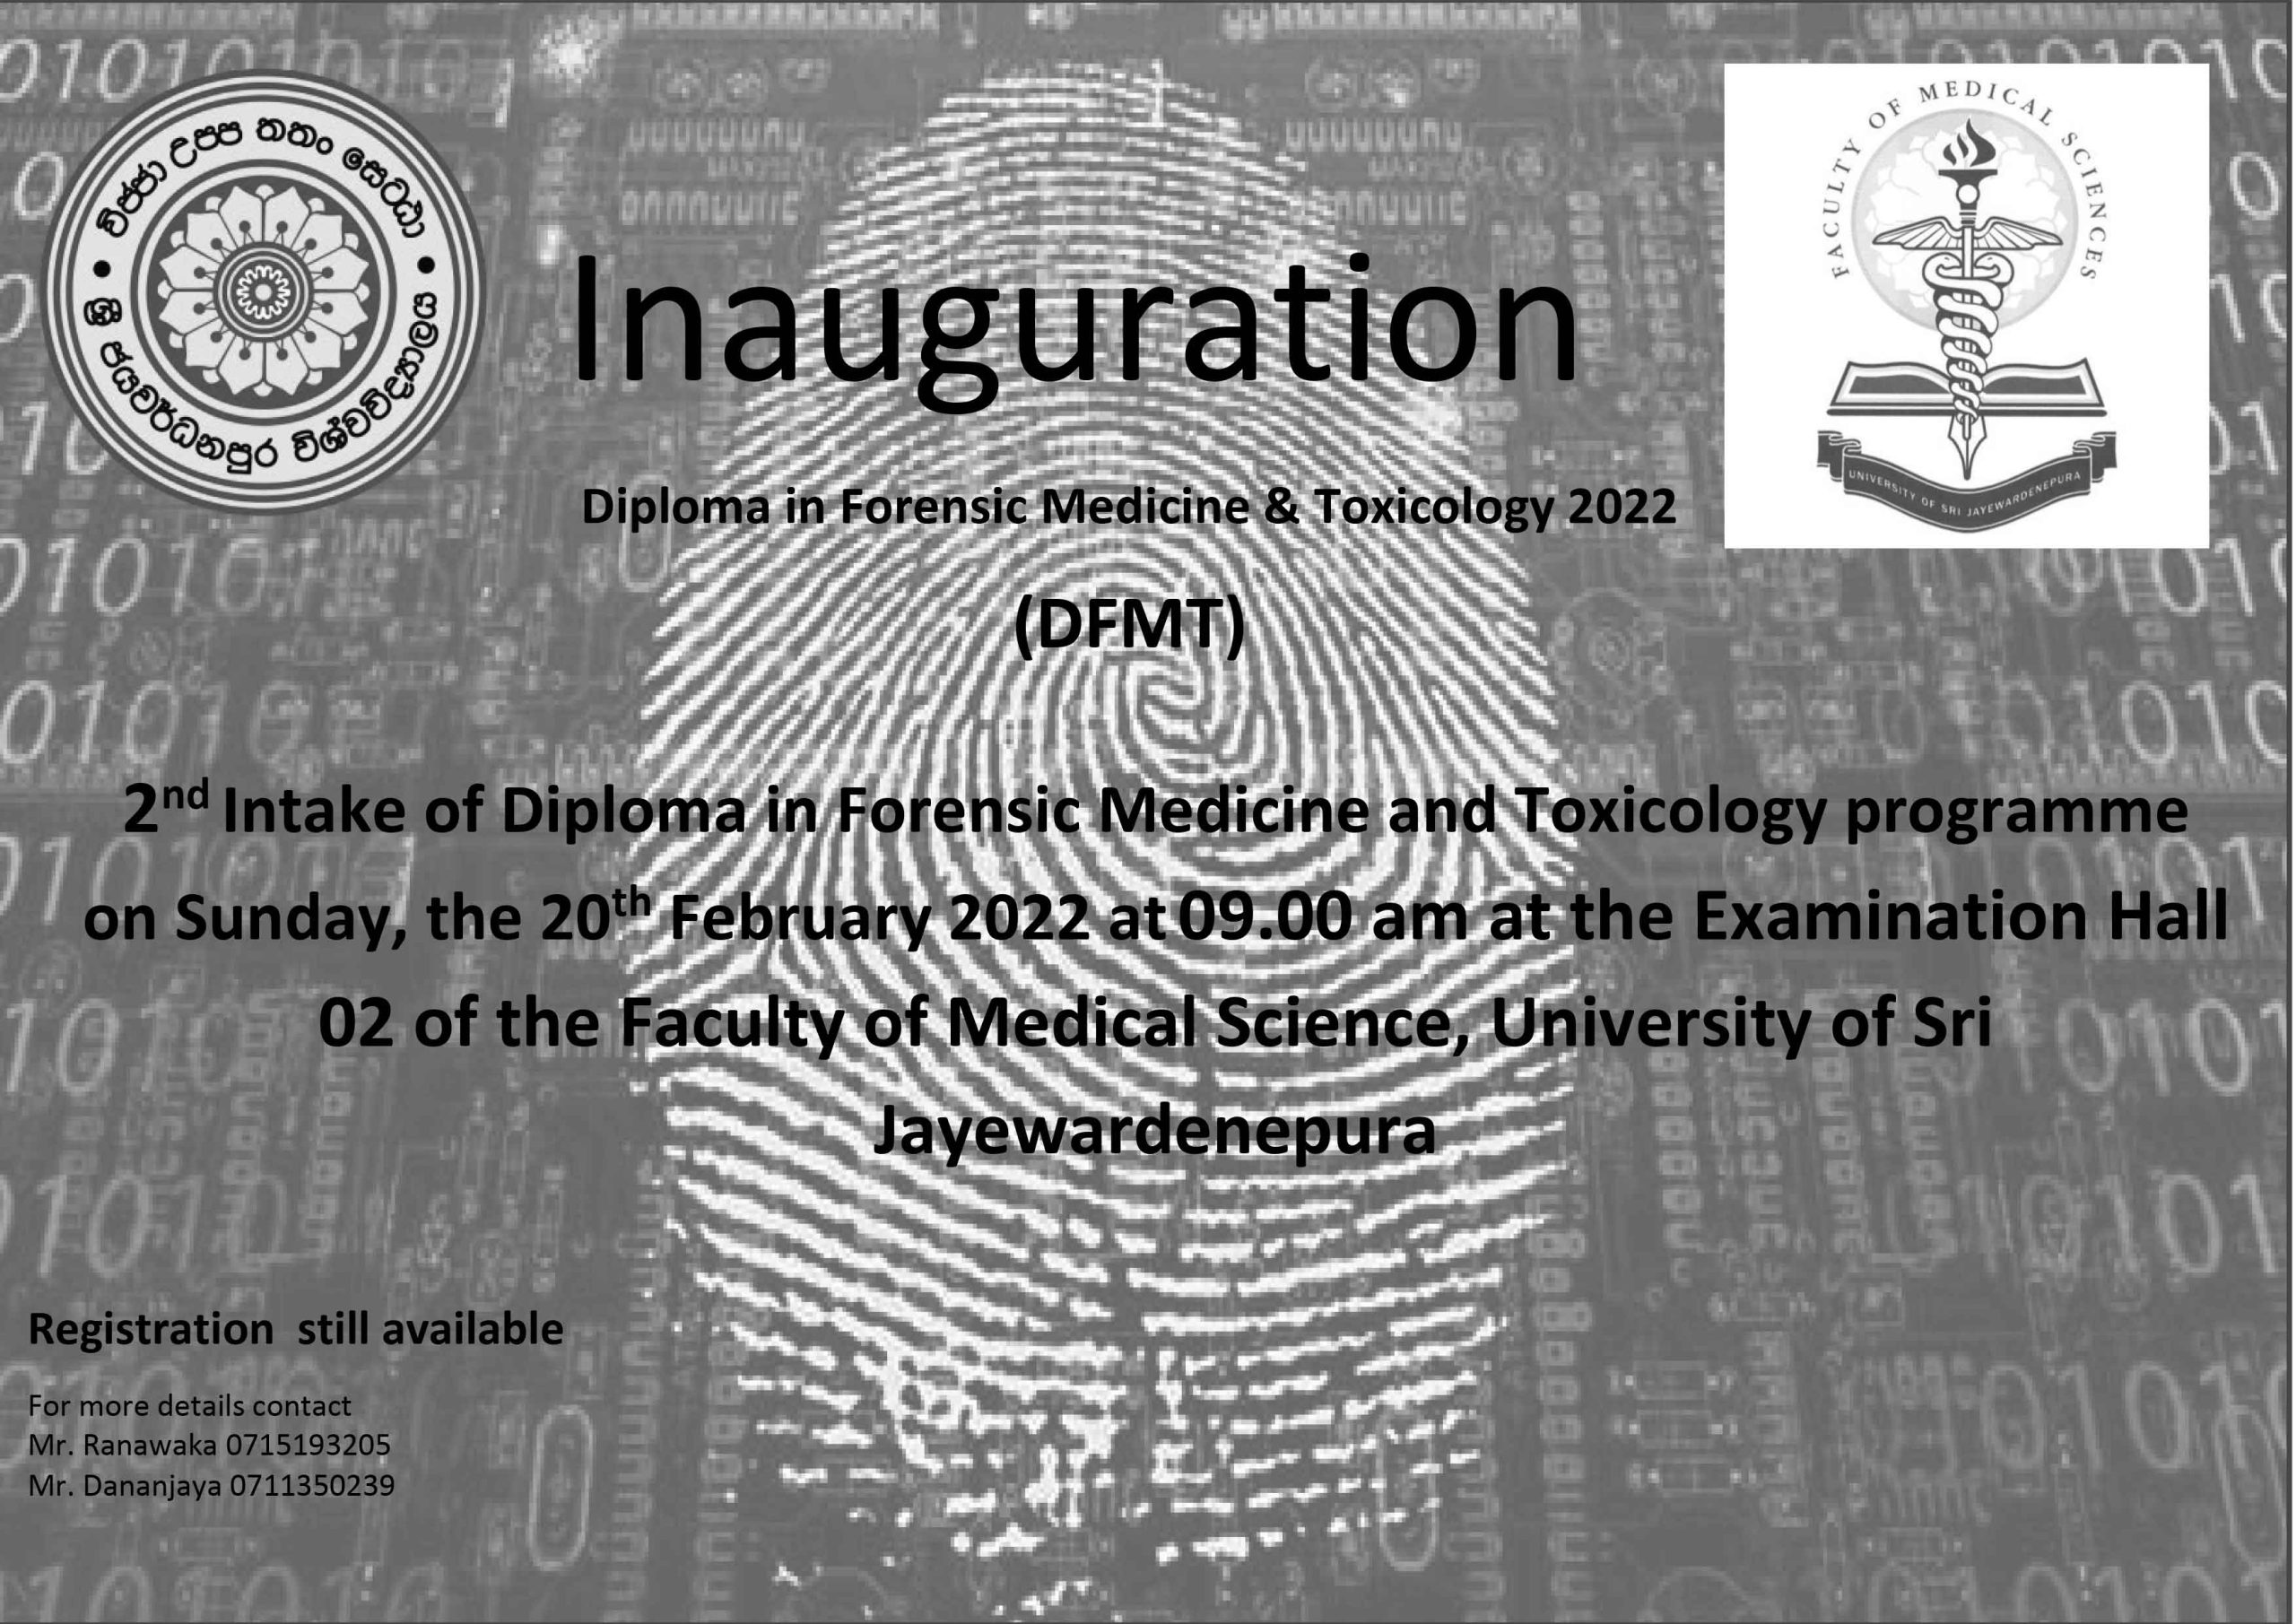 Diploma-in-Forensic-Medicine-Toxicology-2022-Inauguration